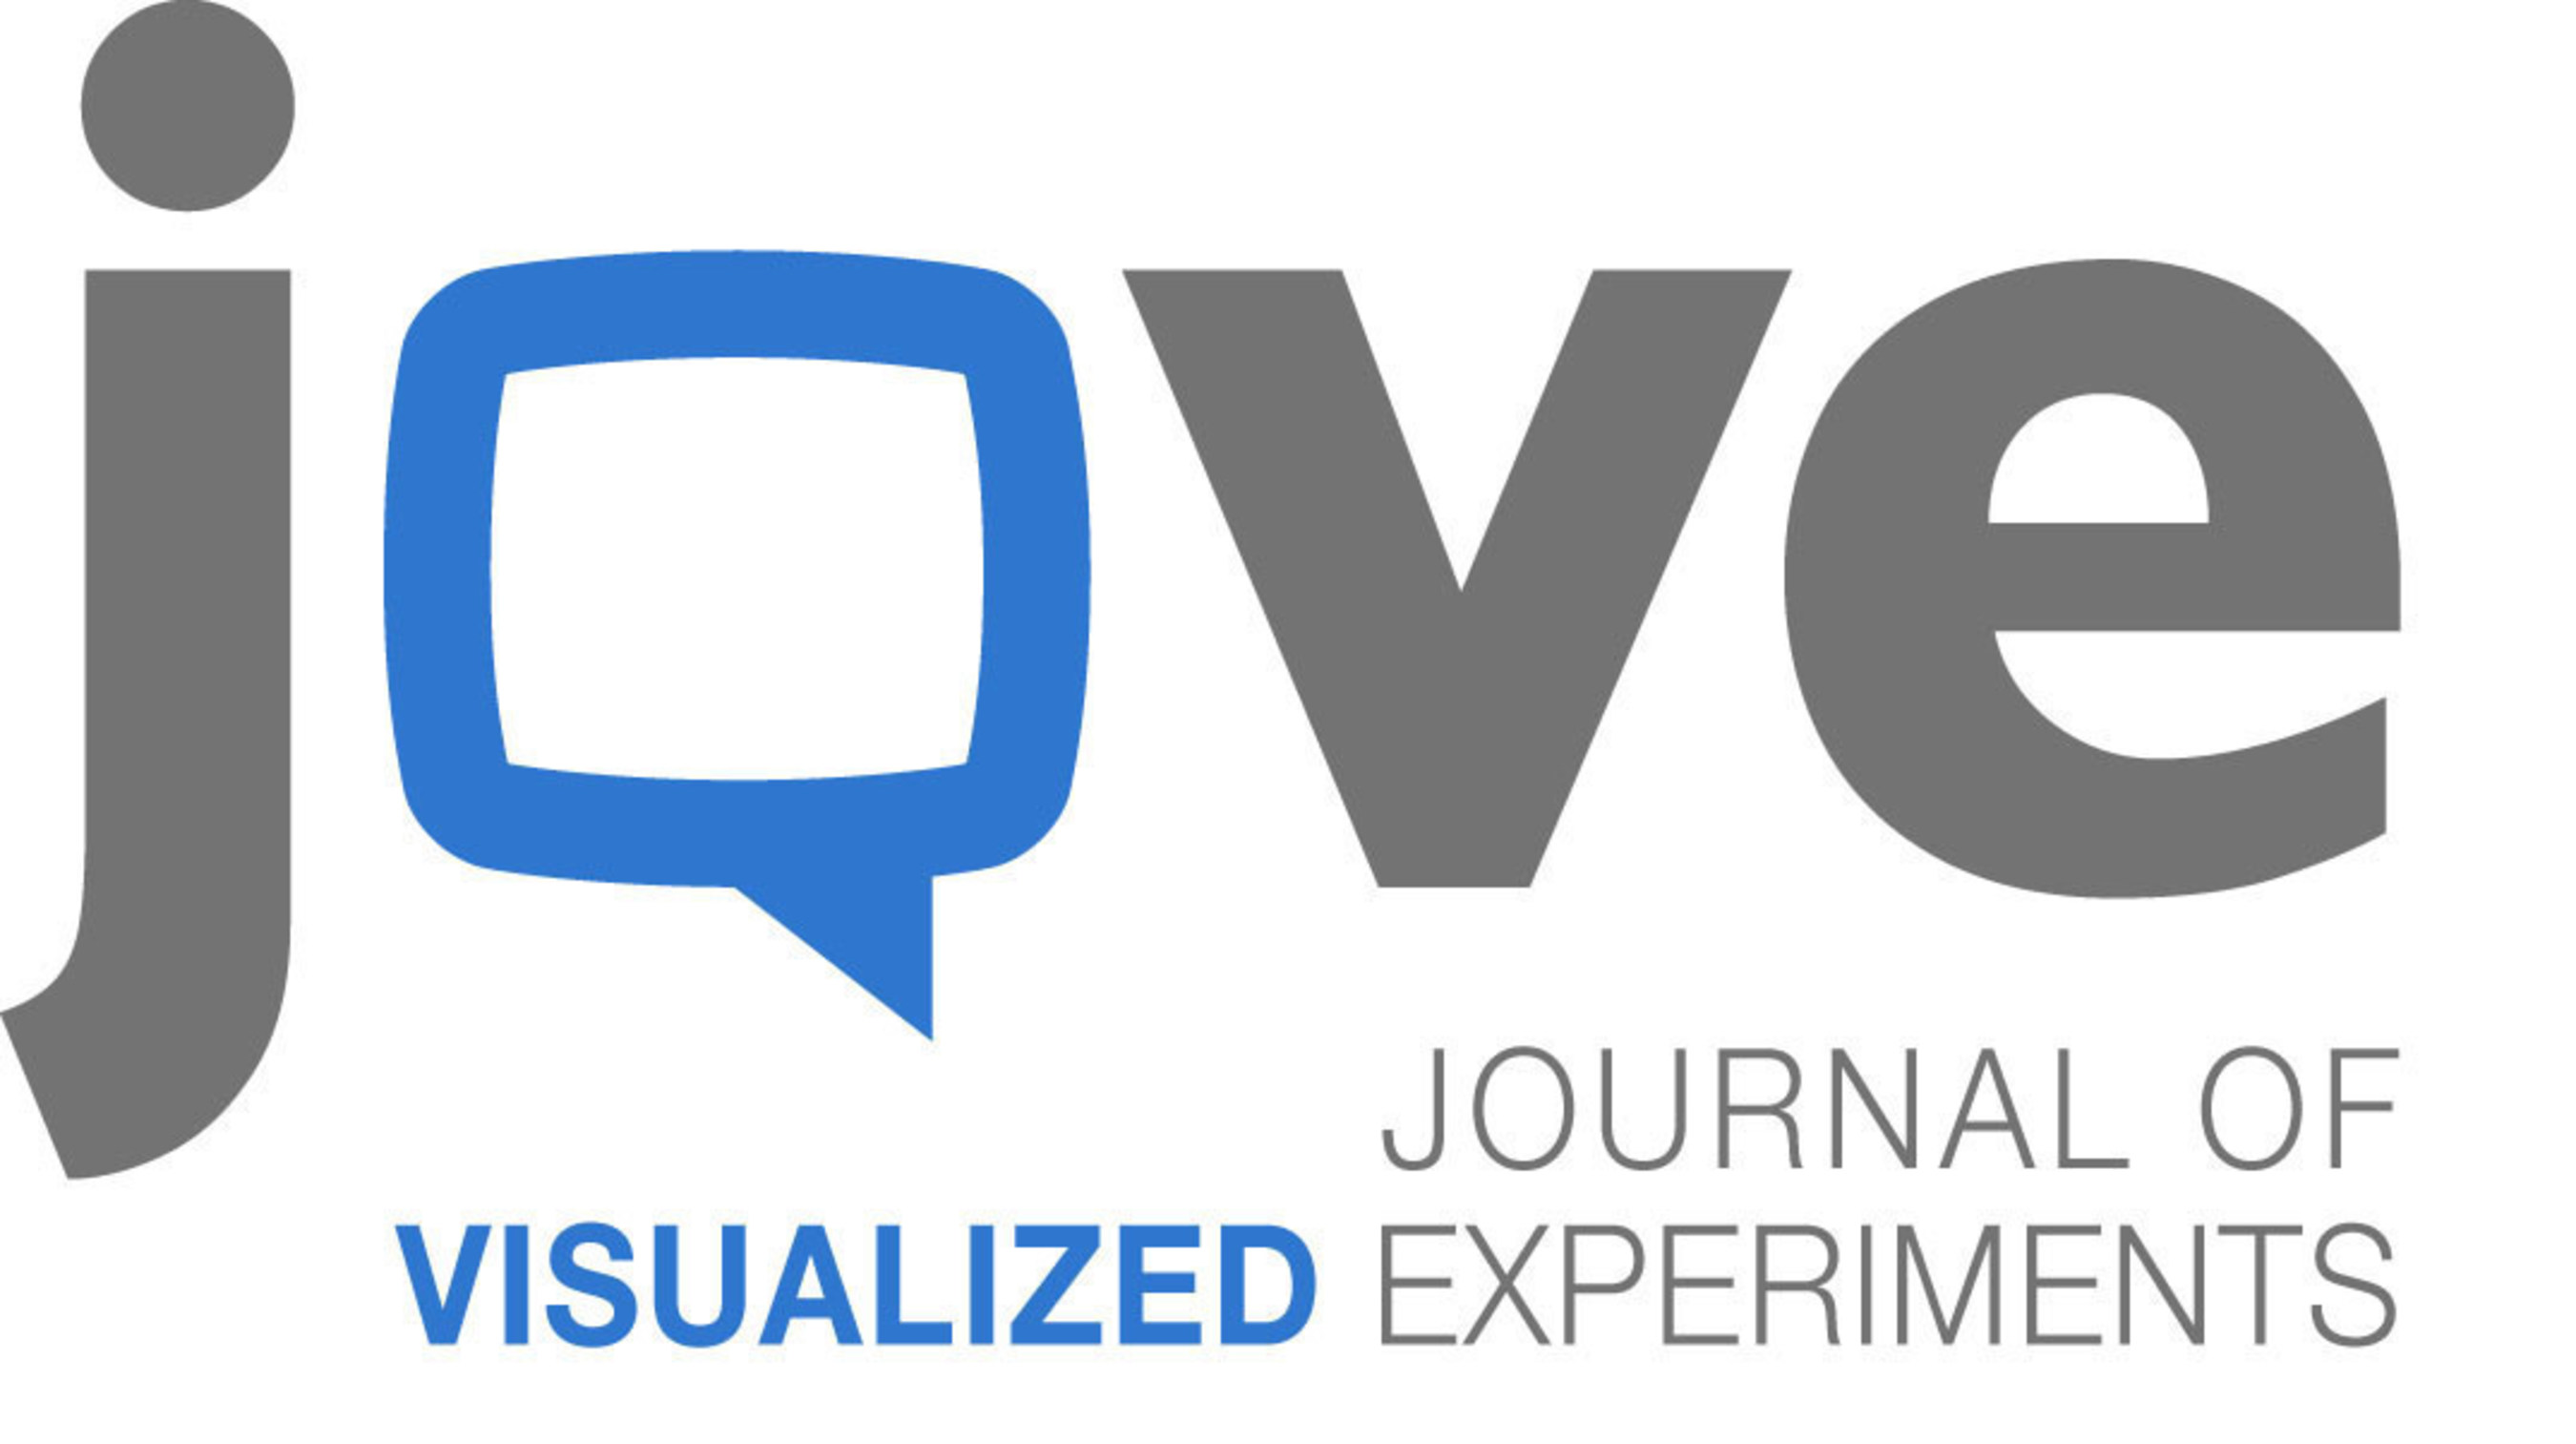 JoVE: Journal of Visualized Experiments